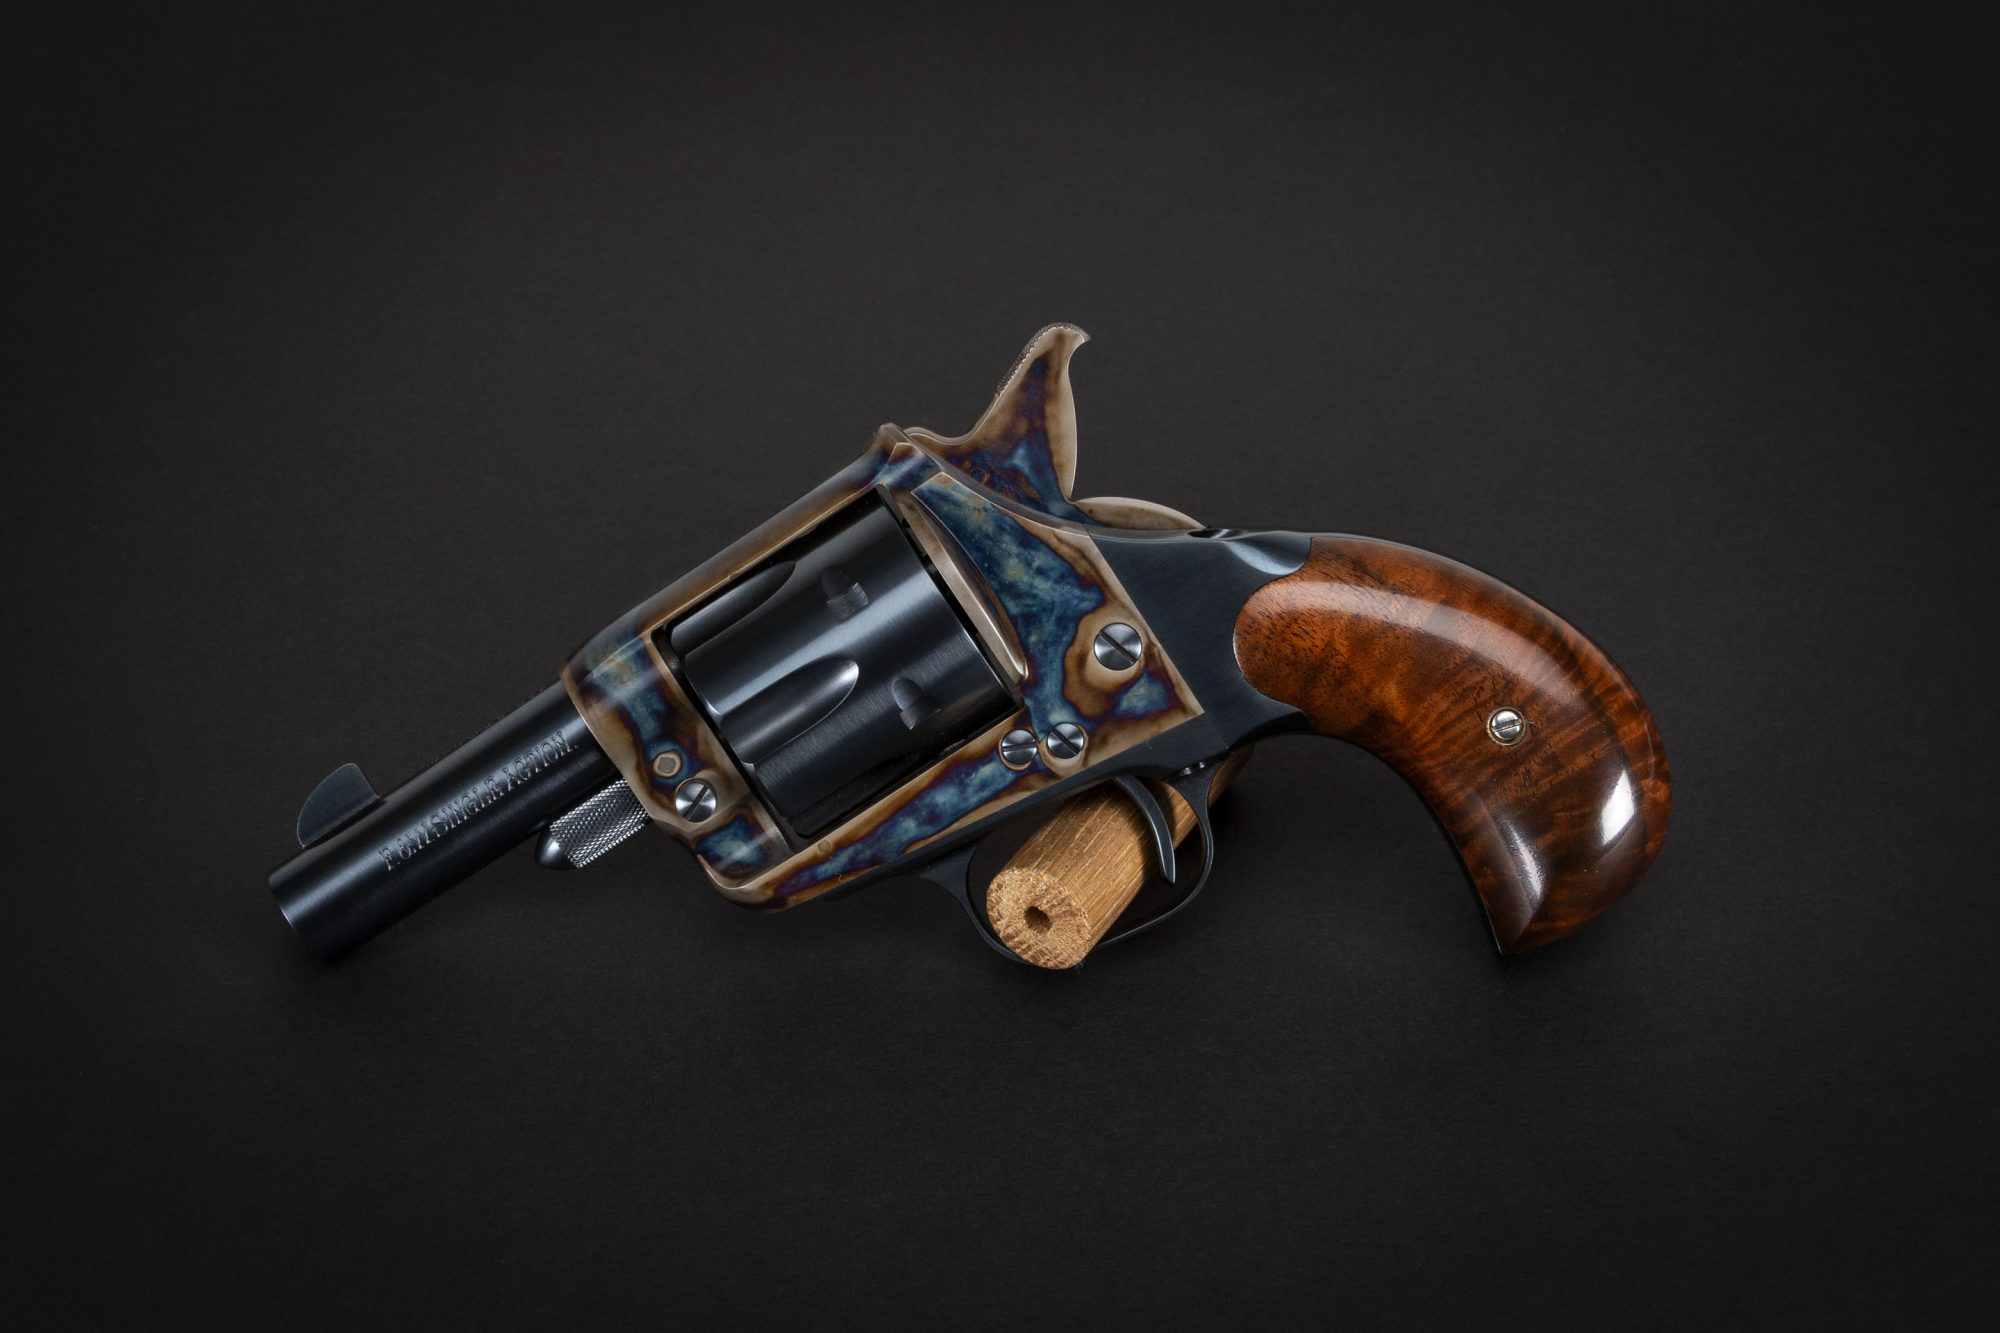 Photo of a U.S. Fire Arms (USFA) Forehand & Wadsworth single action revolver, featuring restoration-grade metal finishes by Turnbull Restoration of Bloomfield, NY